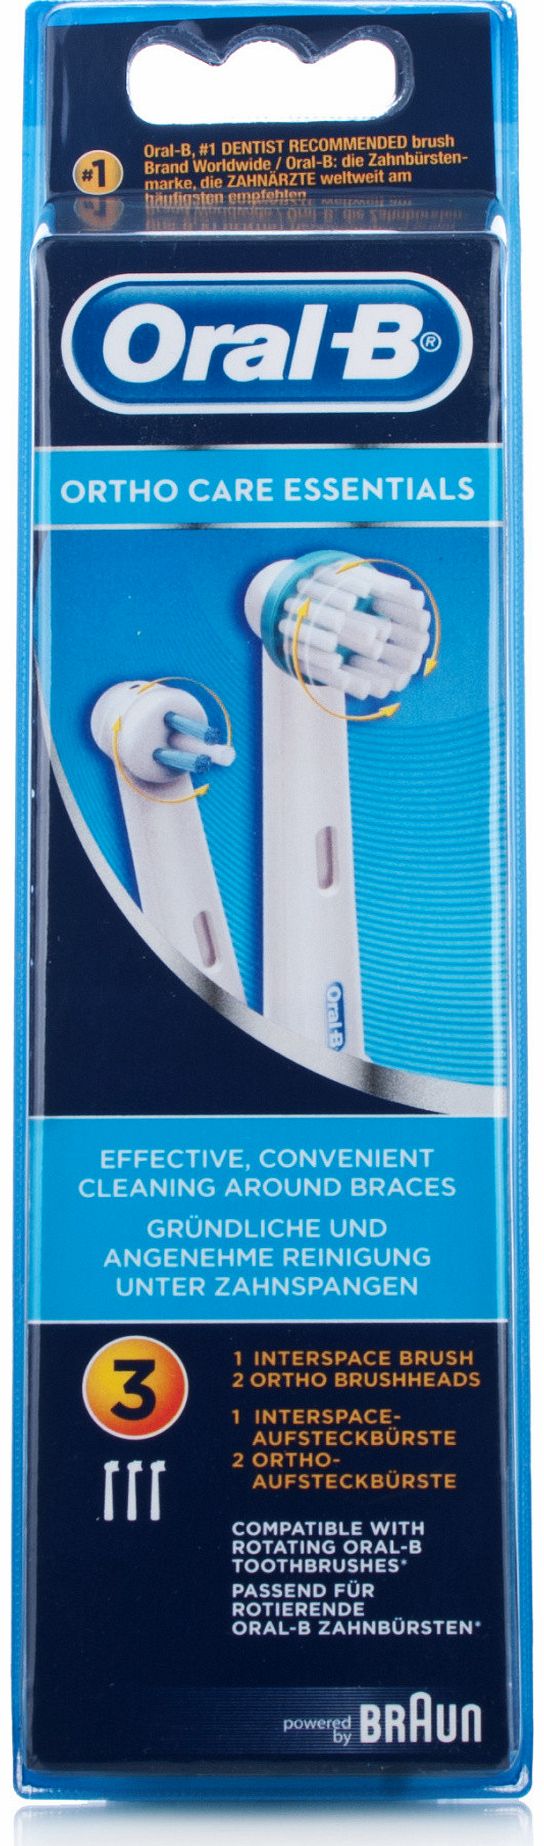 Oral-B Ortho Care Essentials Brush Heads